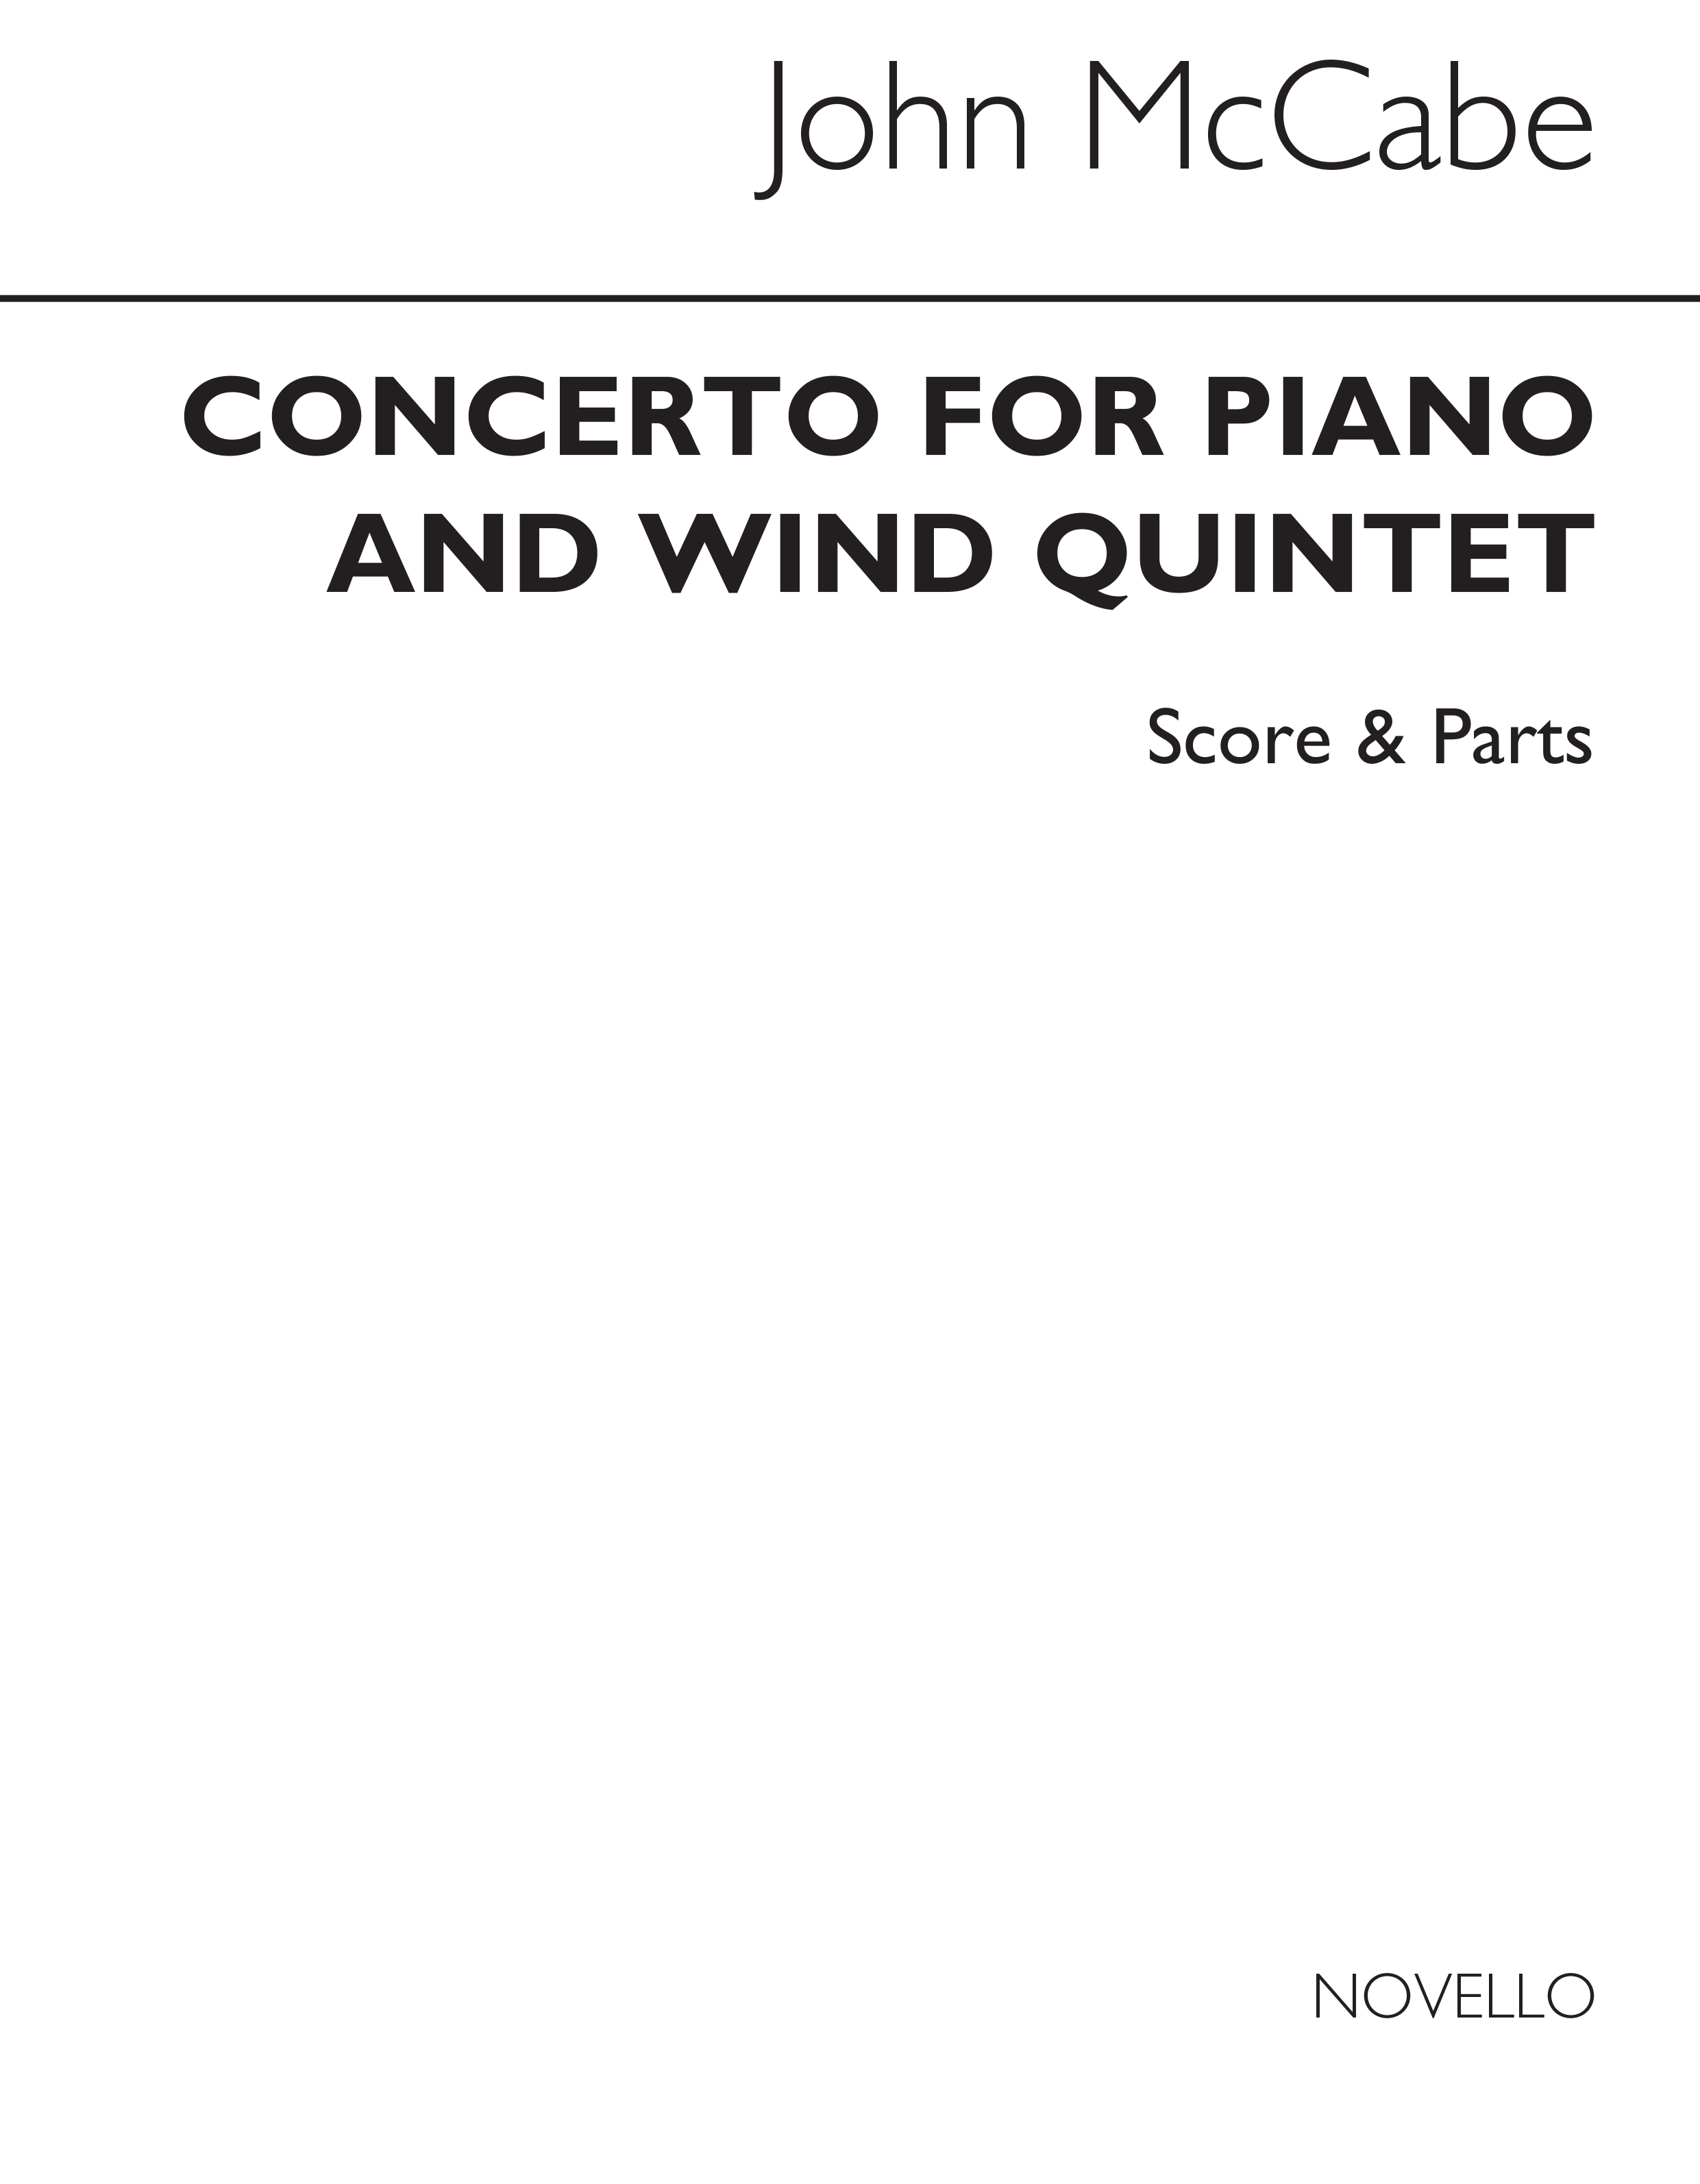 John McCabe: Concerto For Piano And Wind Quintet (Score and Parts)